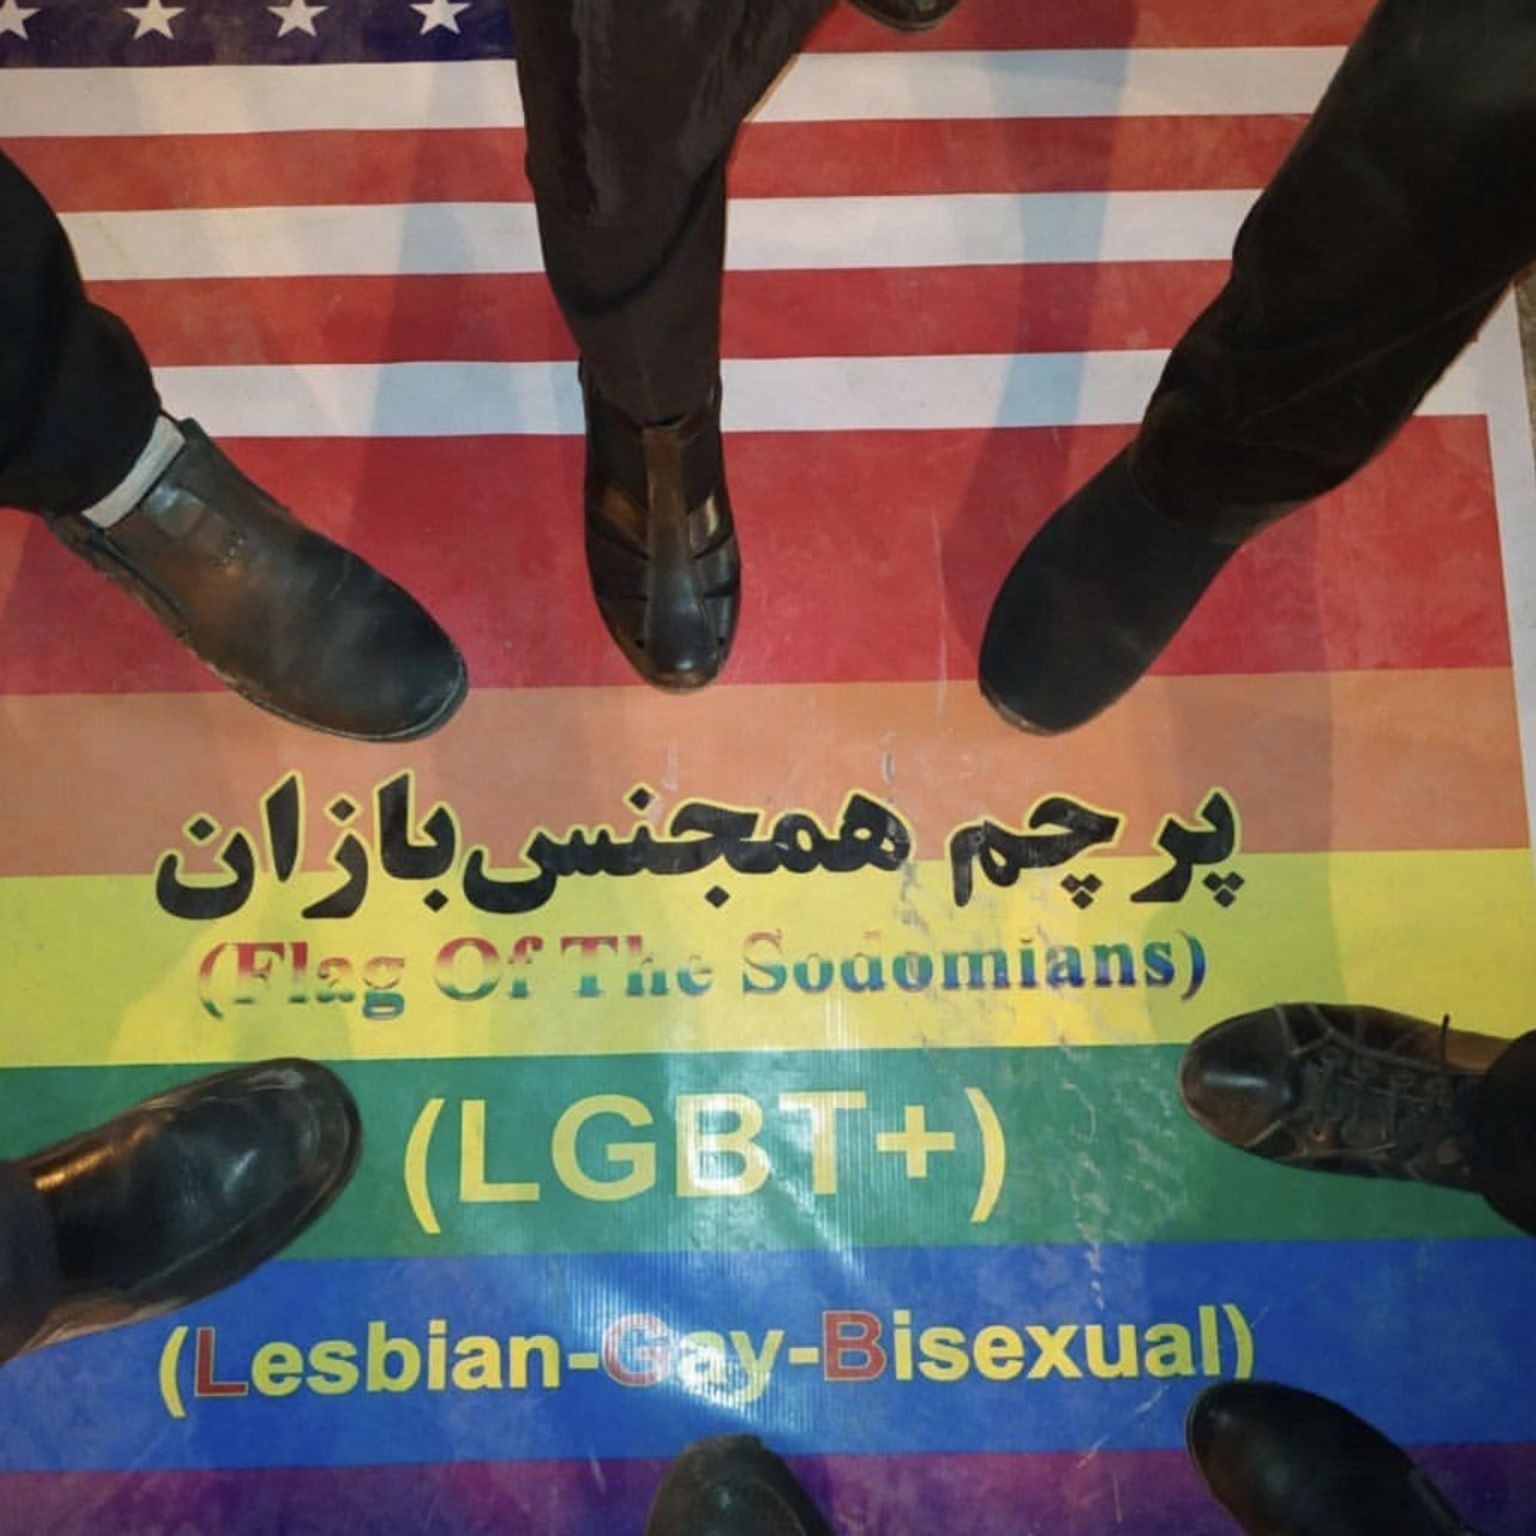 The US and rainbow flags are often disrespected on Iranian social media